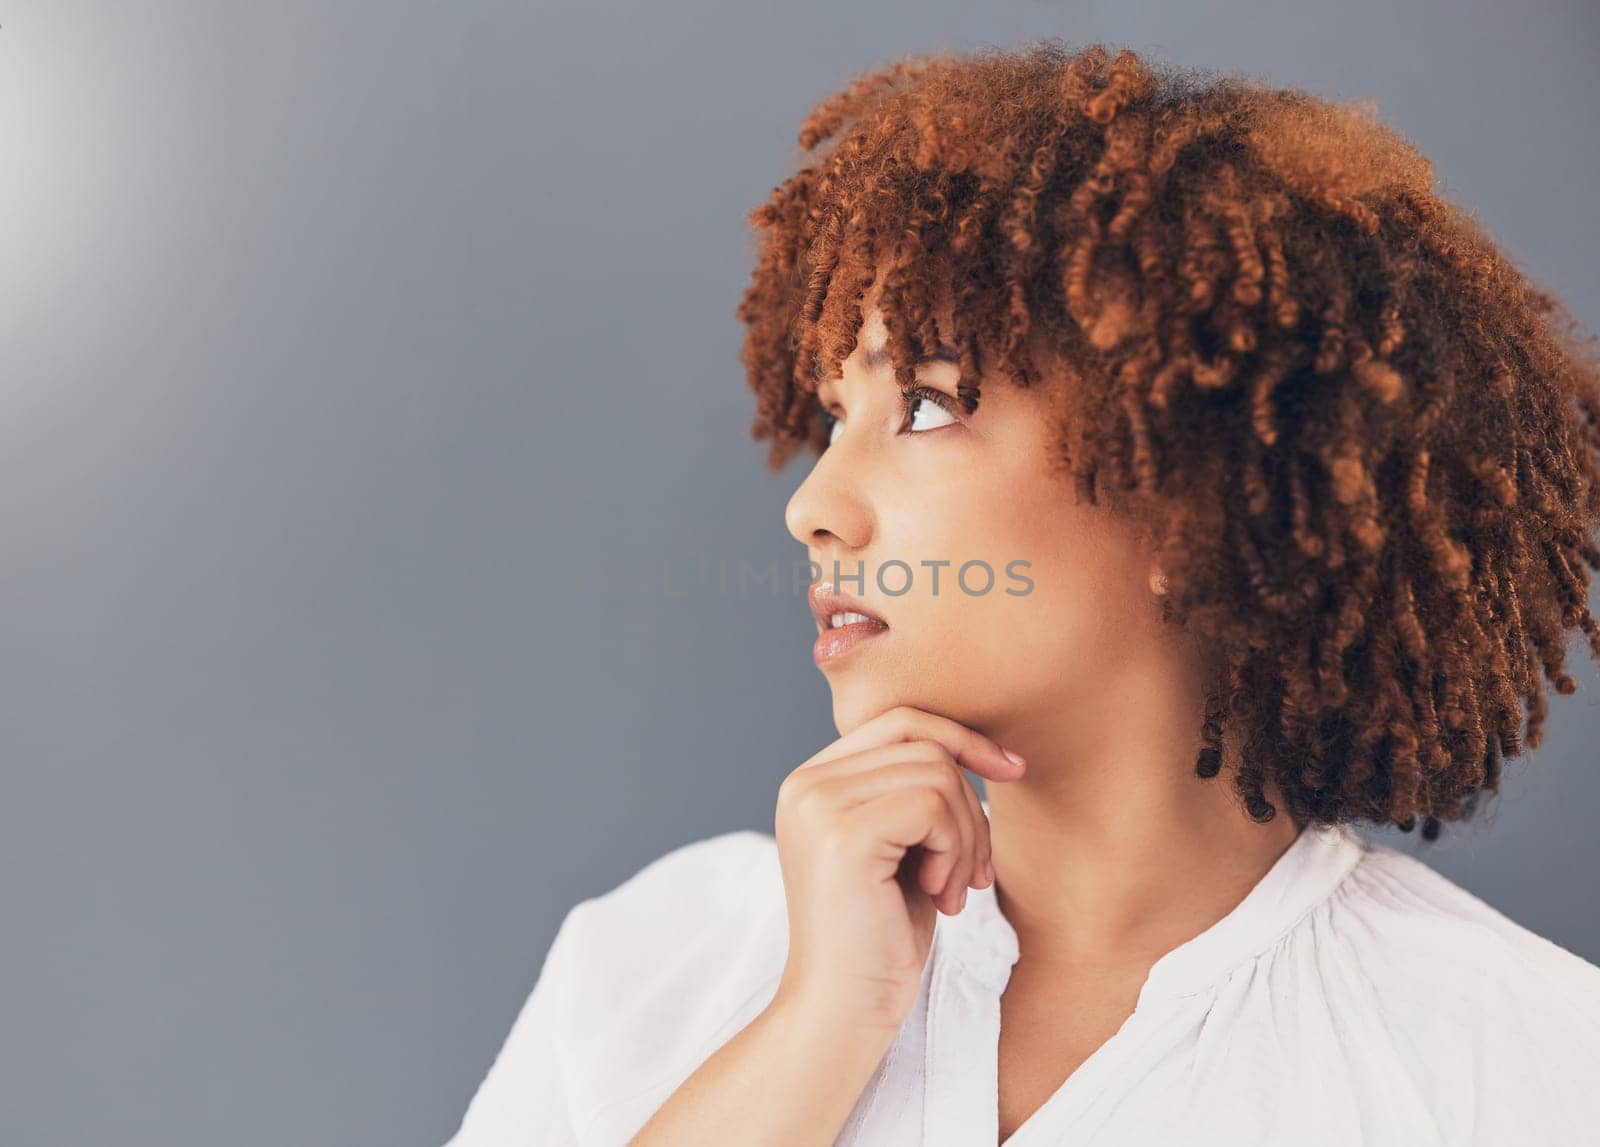 Ideas, thinking and black woman isolated on gray background scholarship, education or university decision. Contemplating, inspiration and young person, model or student with thoughtful idea in studio.